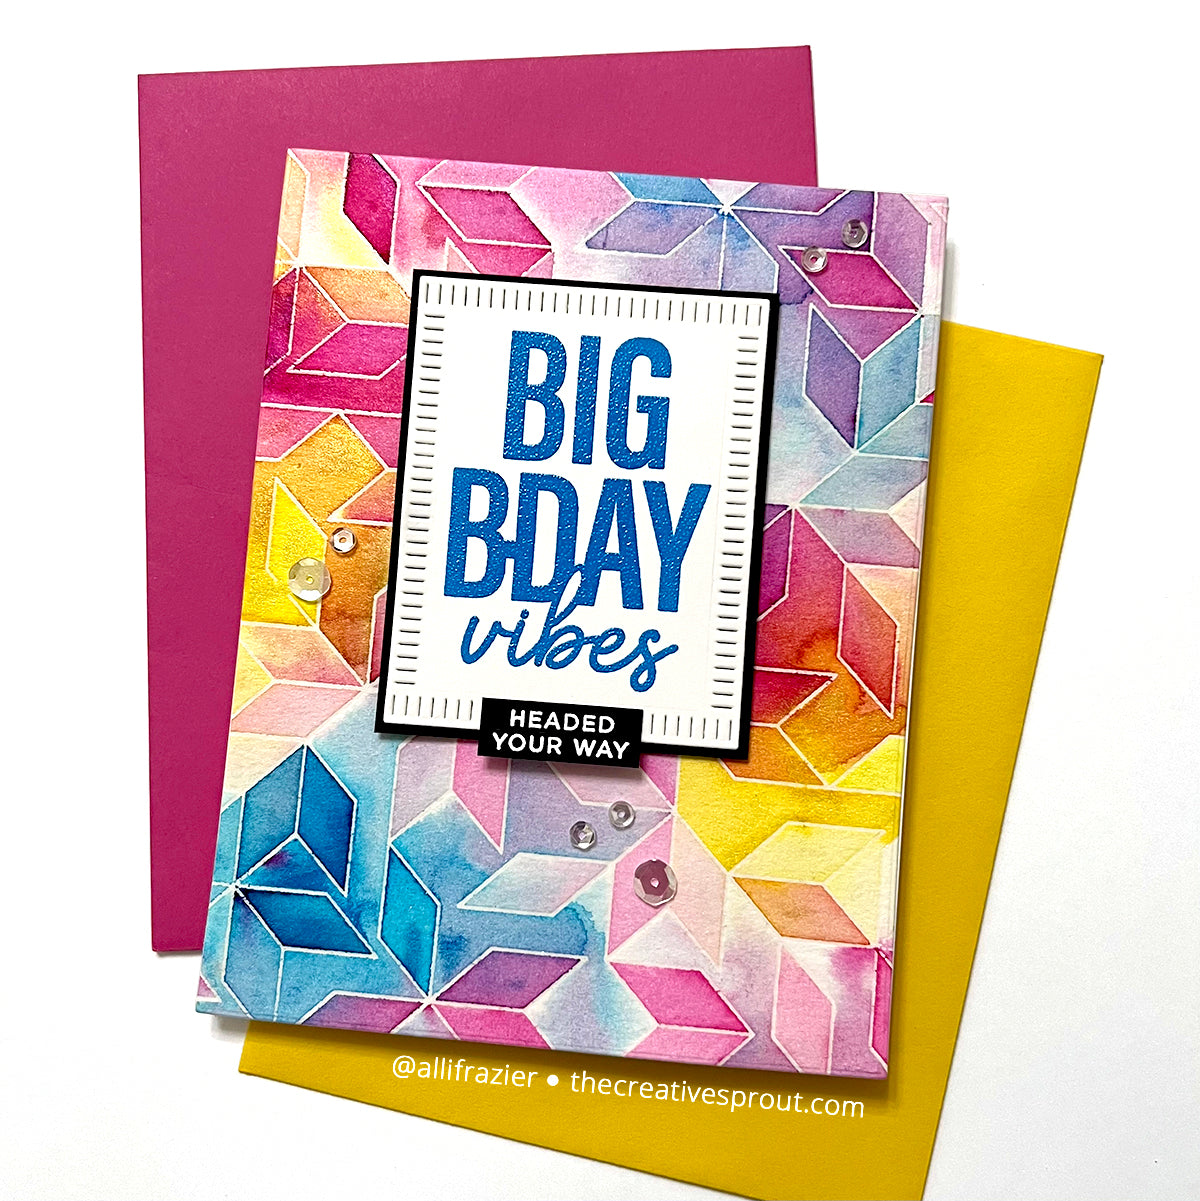 Gina K Designs BIRTHDAY CHEER Clear Stamps gkd154 – Simon Says Stamp